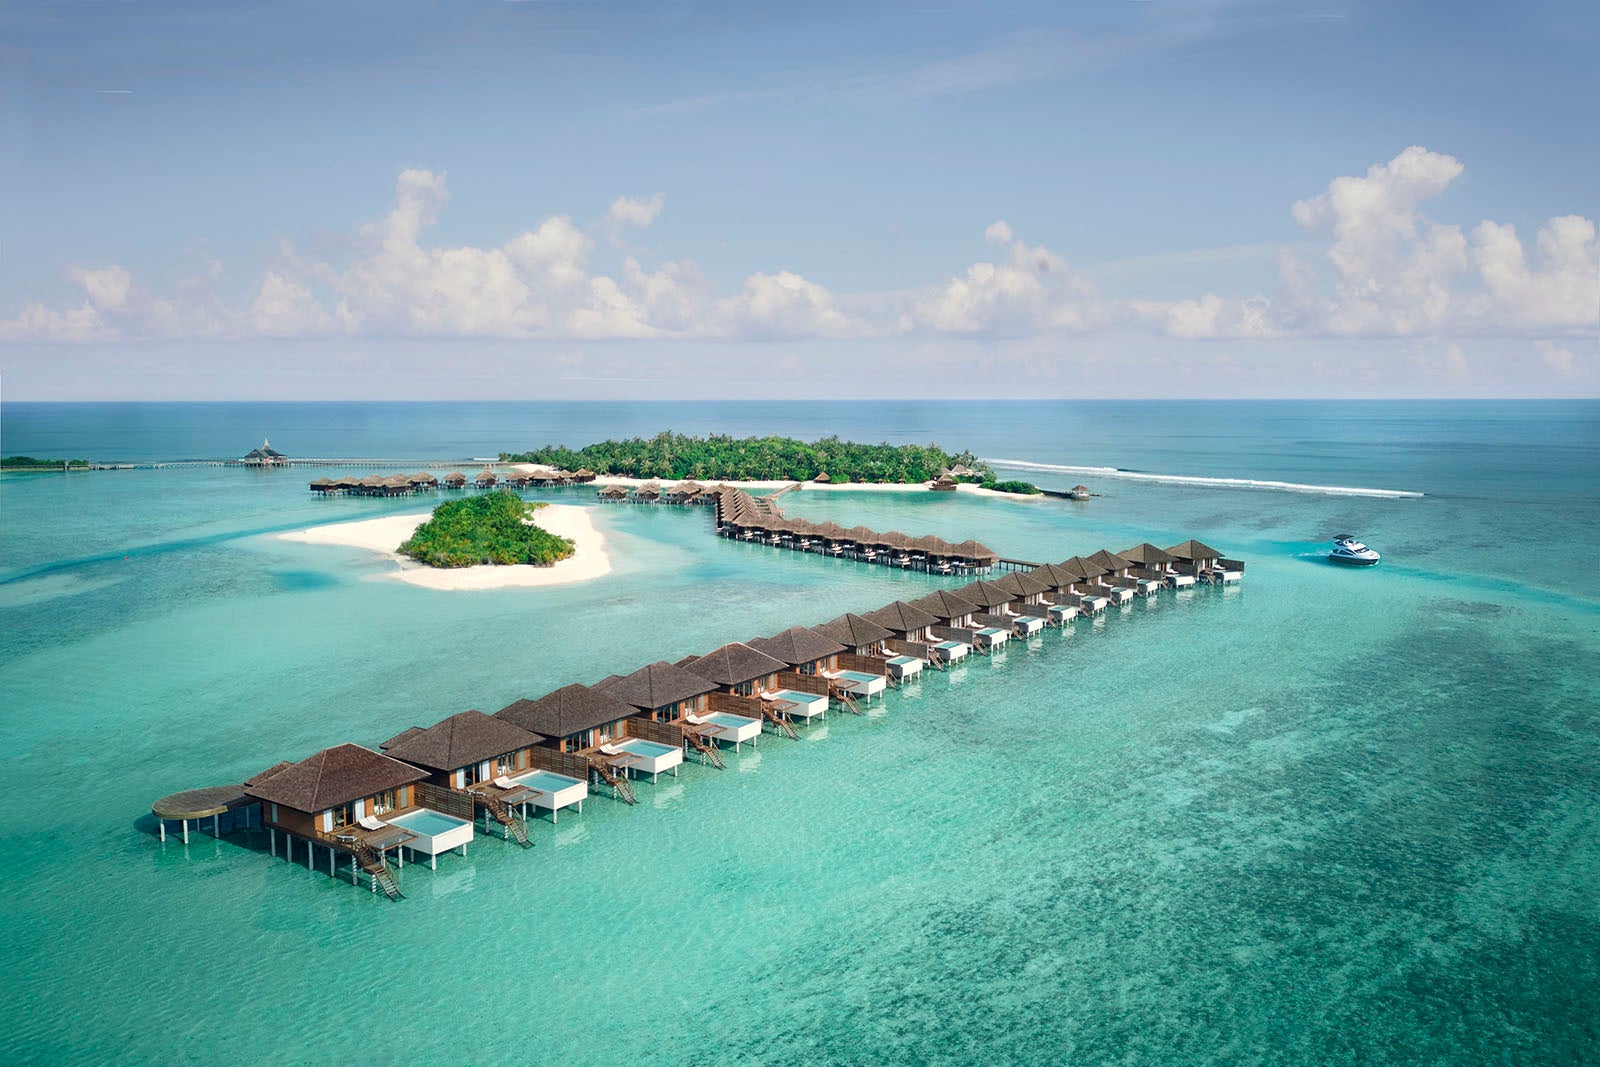 These are the best all-inclusive resorts in the Maldives, from overwater bungalows to family-friendly getaways